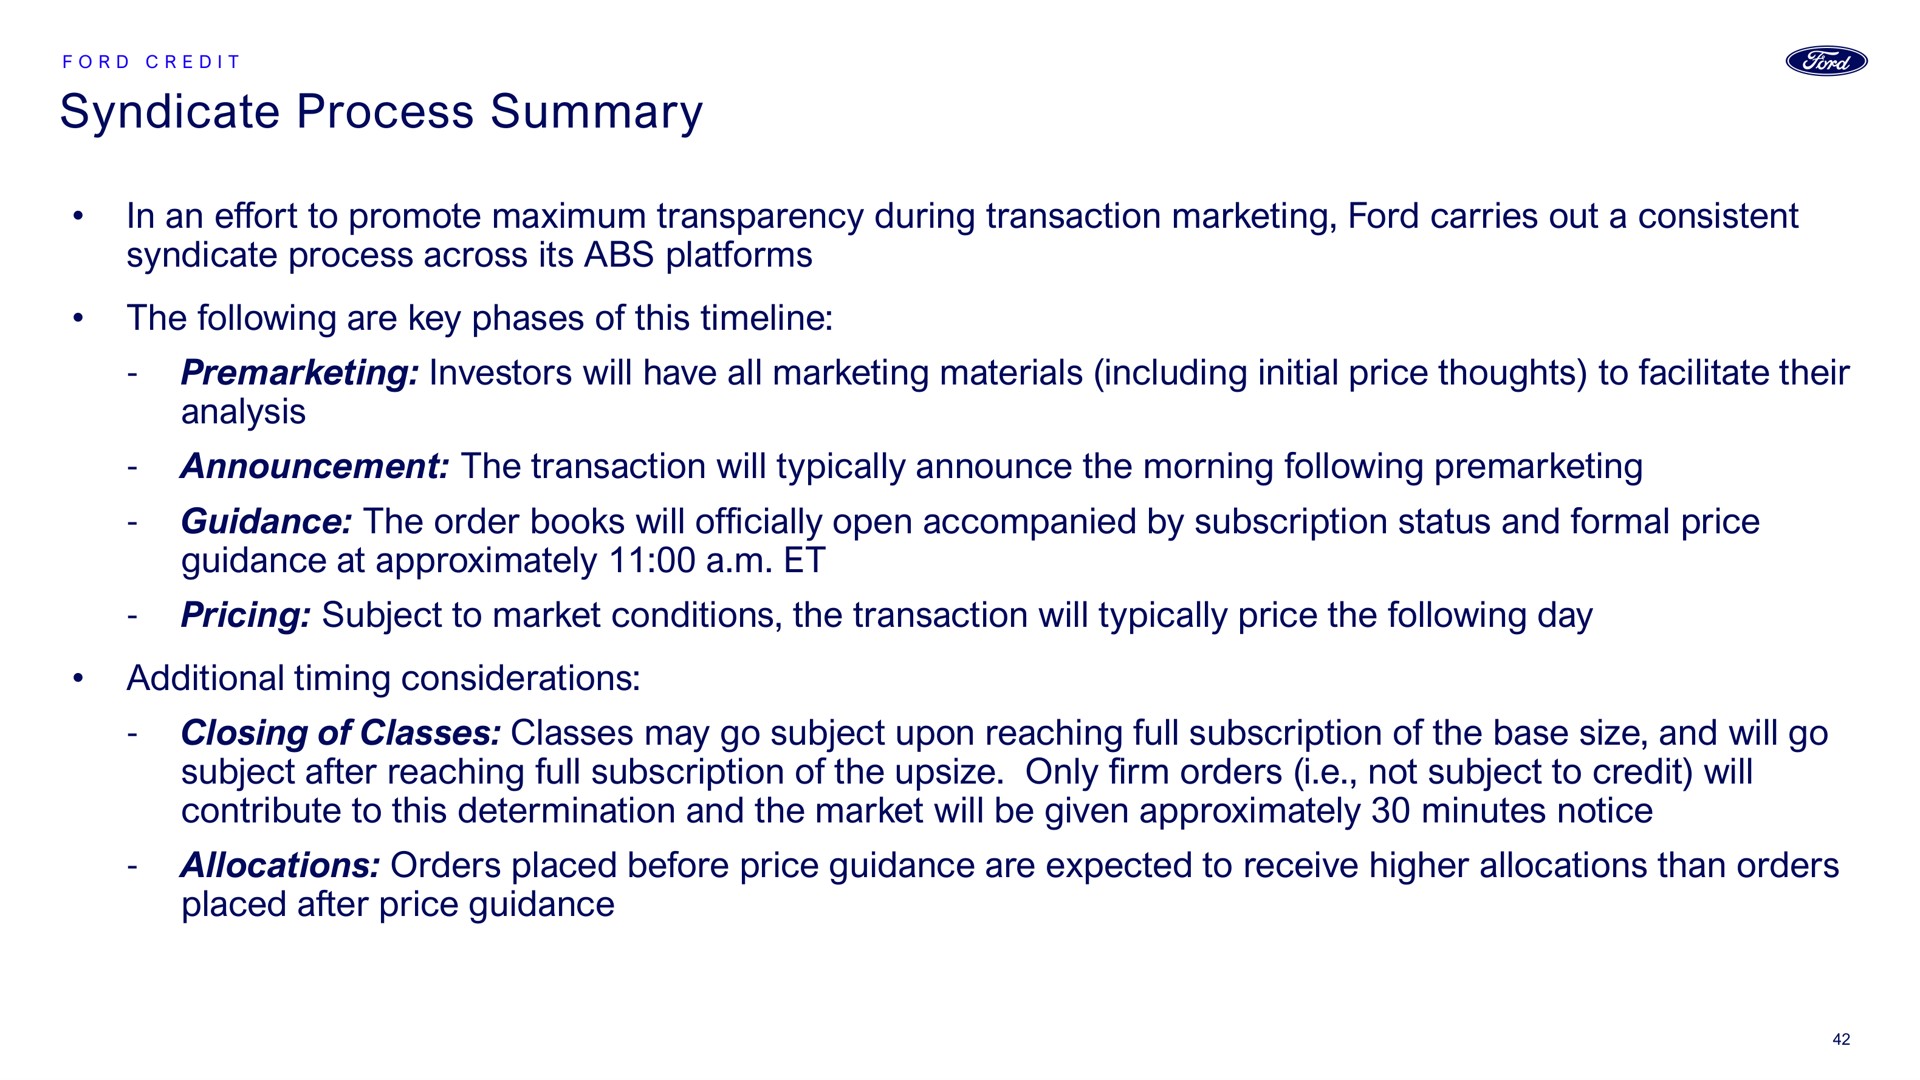 syndicate process summary in an effort to promote maximum transparency during transaction marketing ford carries out a consistent syndicate process across its platforms the following are key phases of this investors will have all marketing materials including initial price thoughts to facilitate their analysis announcement the transaction will typically announce the morning following guidance the order books will officially open accompanied by subscription status and formal price guidance at approximately a pricing subject to market conditions the transaction will typically price the following day additional timing considerations closing of classes classes may go subject upon reaching full subscription of the base size and will go subject after reaching full subscription of the only firm orders i not subject to credit will contribute to this determination and the market will be given approximately minutes notice allocations orders placed before price guidance are expected to receive higher allocations than orders placed after price guidance | Ford